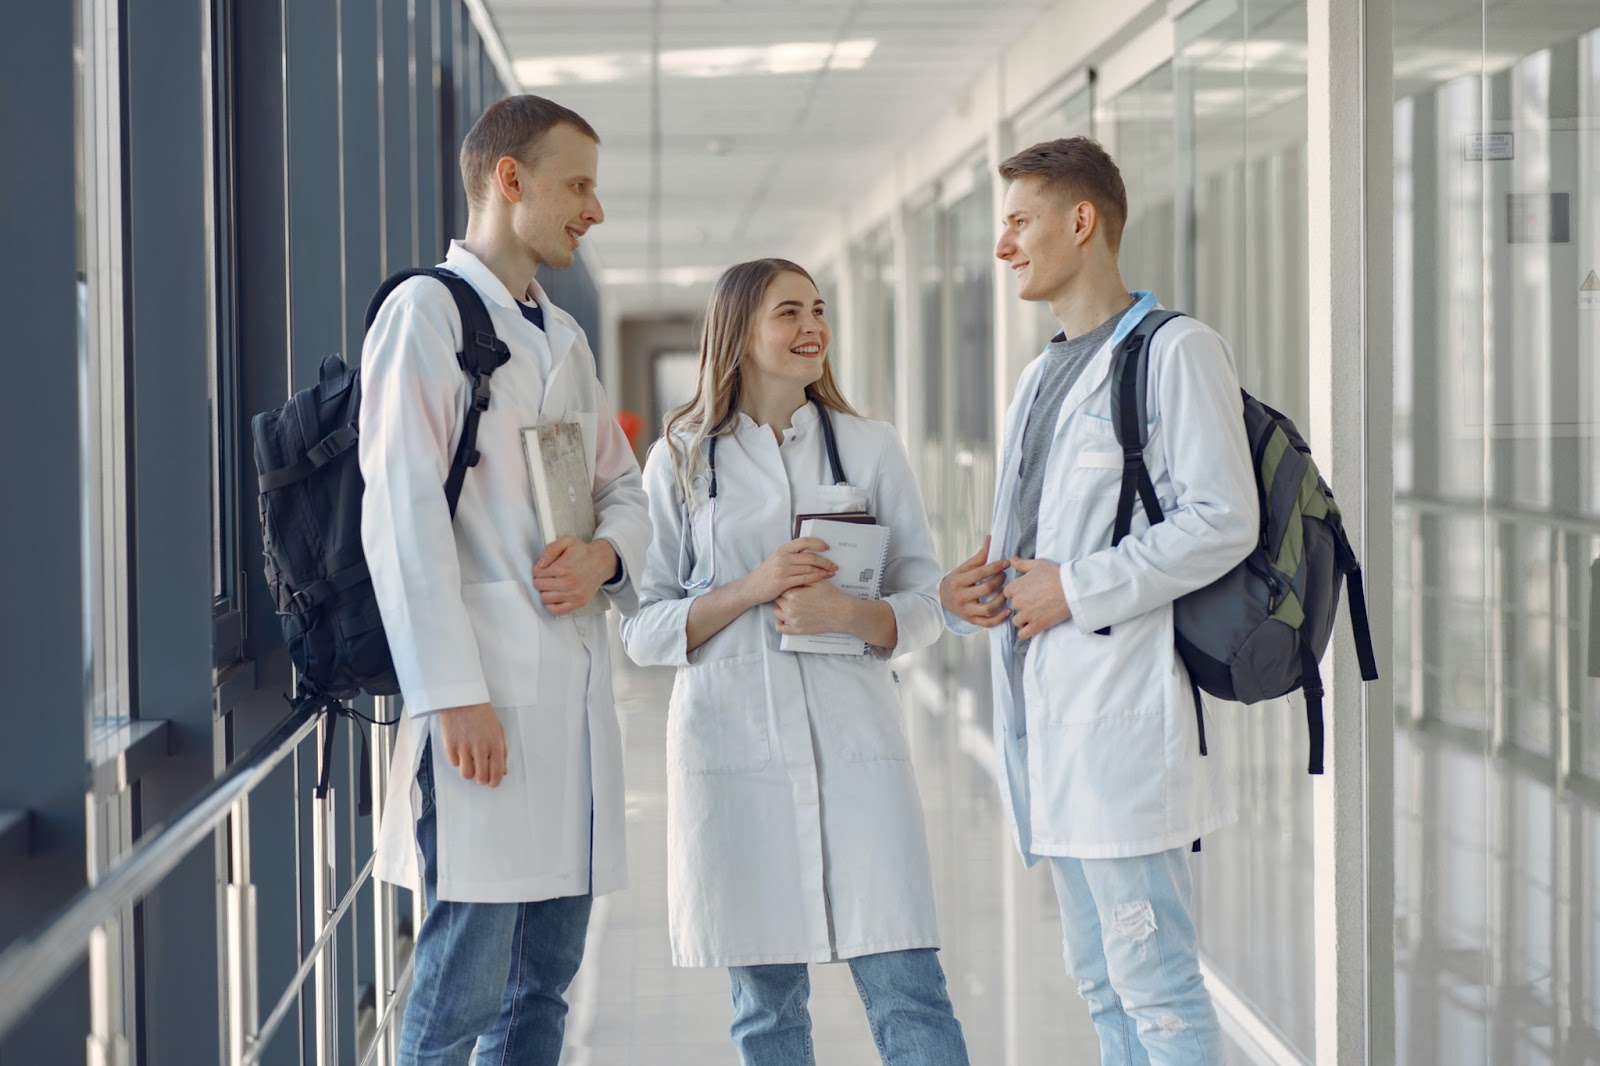 Group of three medical students talking to each other in a hallway